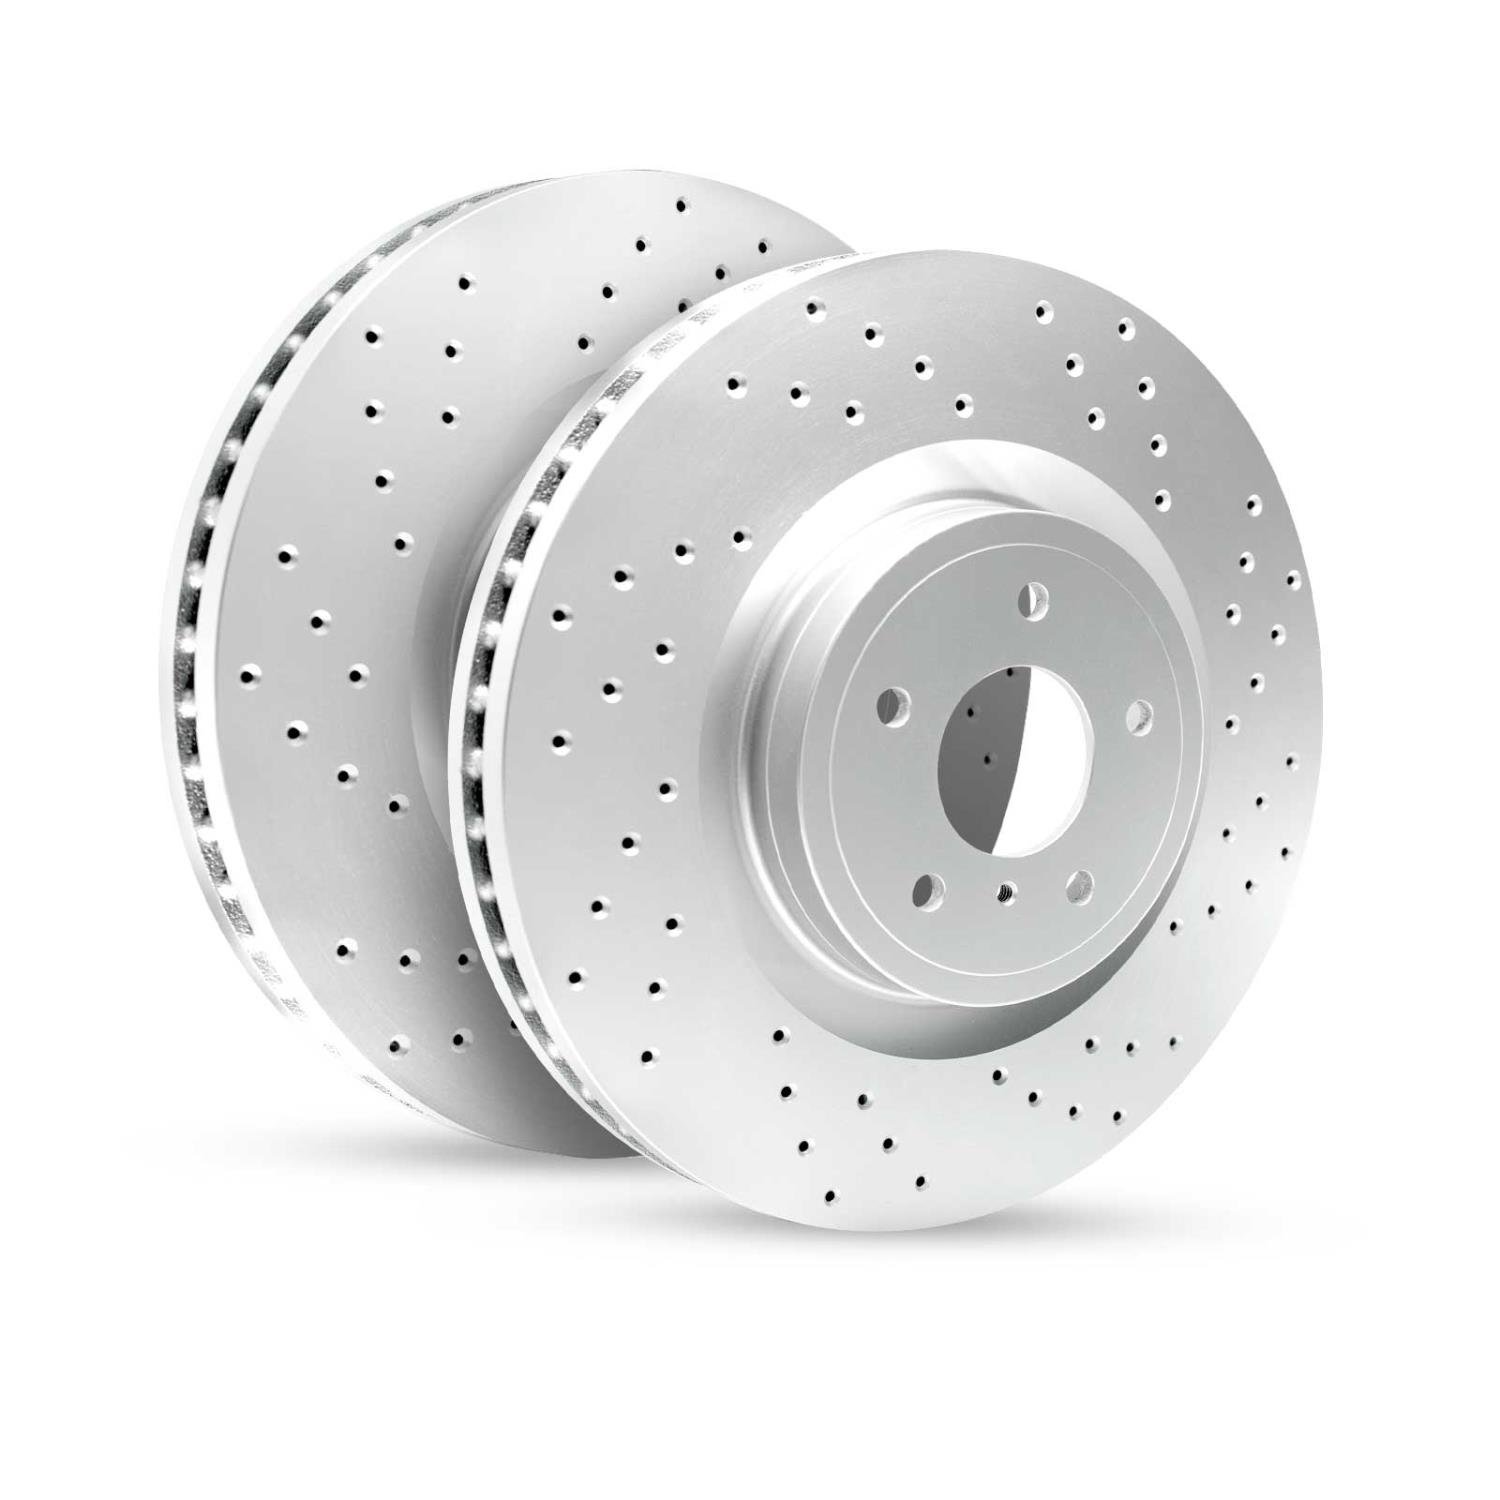 GEO-Carbon Drilled/Slotted Rotors, 2008-2013 BMW, Position: Rear